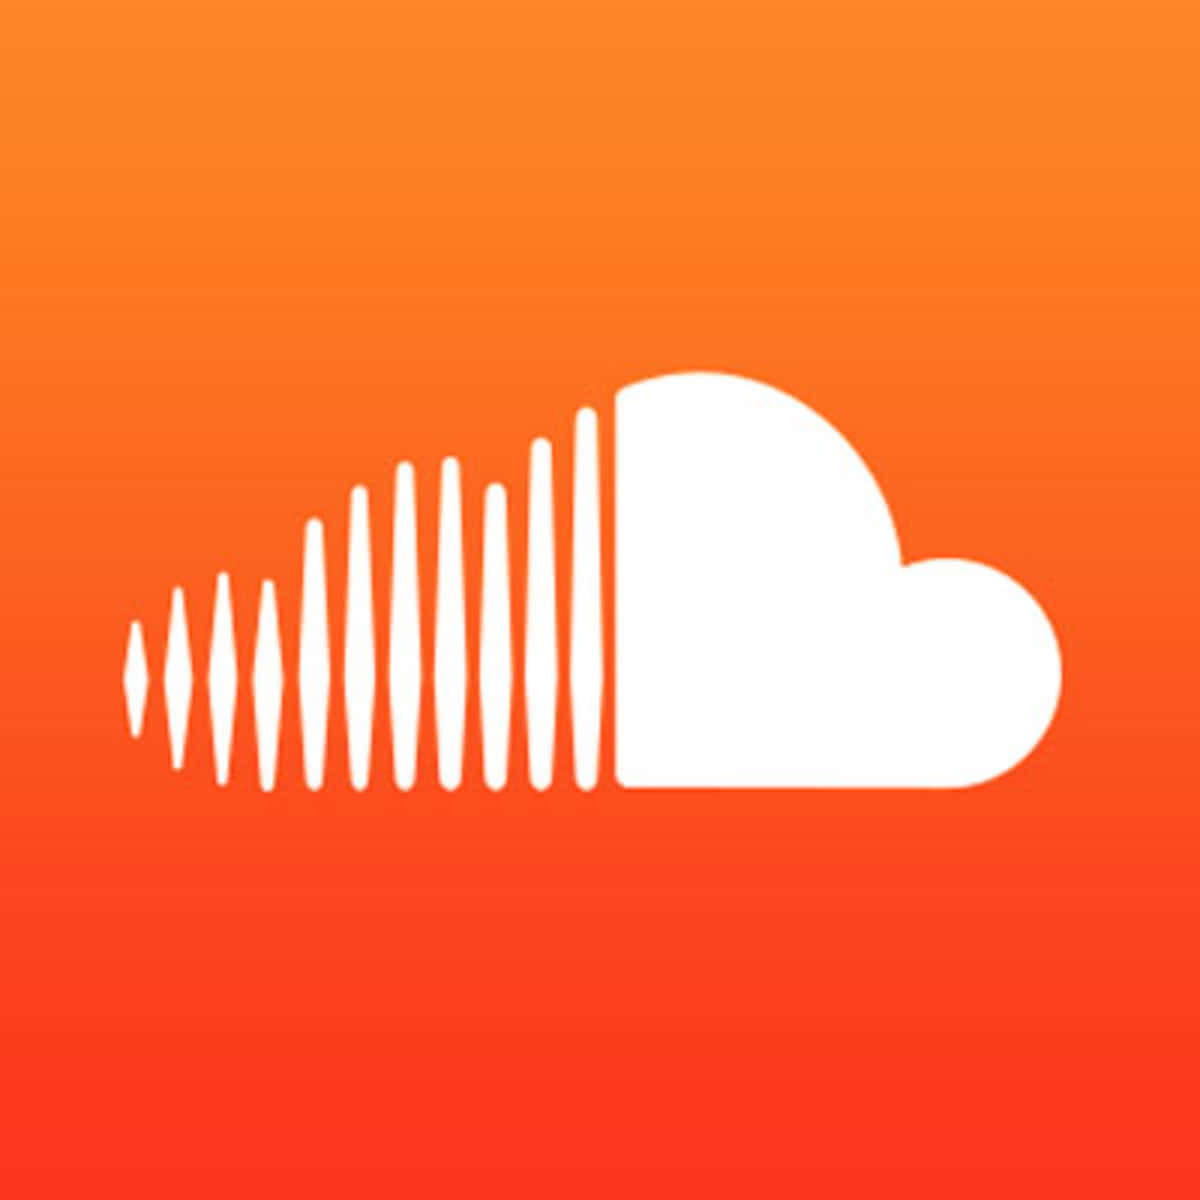 Get Creative&Share Your Sound with SoundCloud